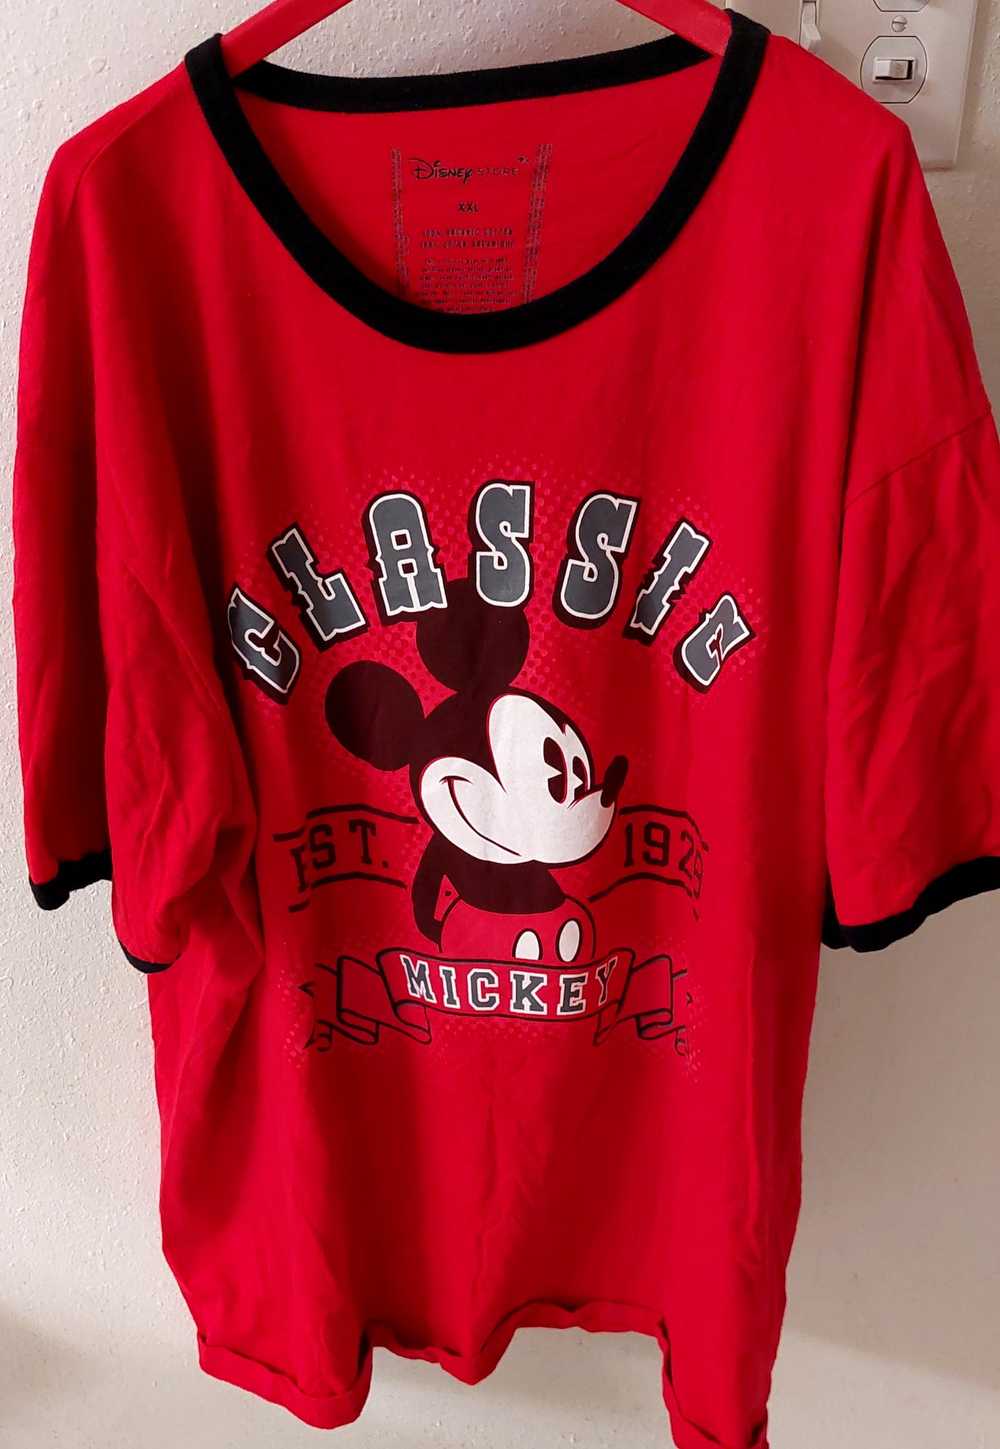 Disney Mickey Mouse - Classic Since 1928 - T-Shirt - image 2